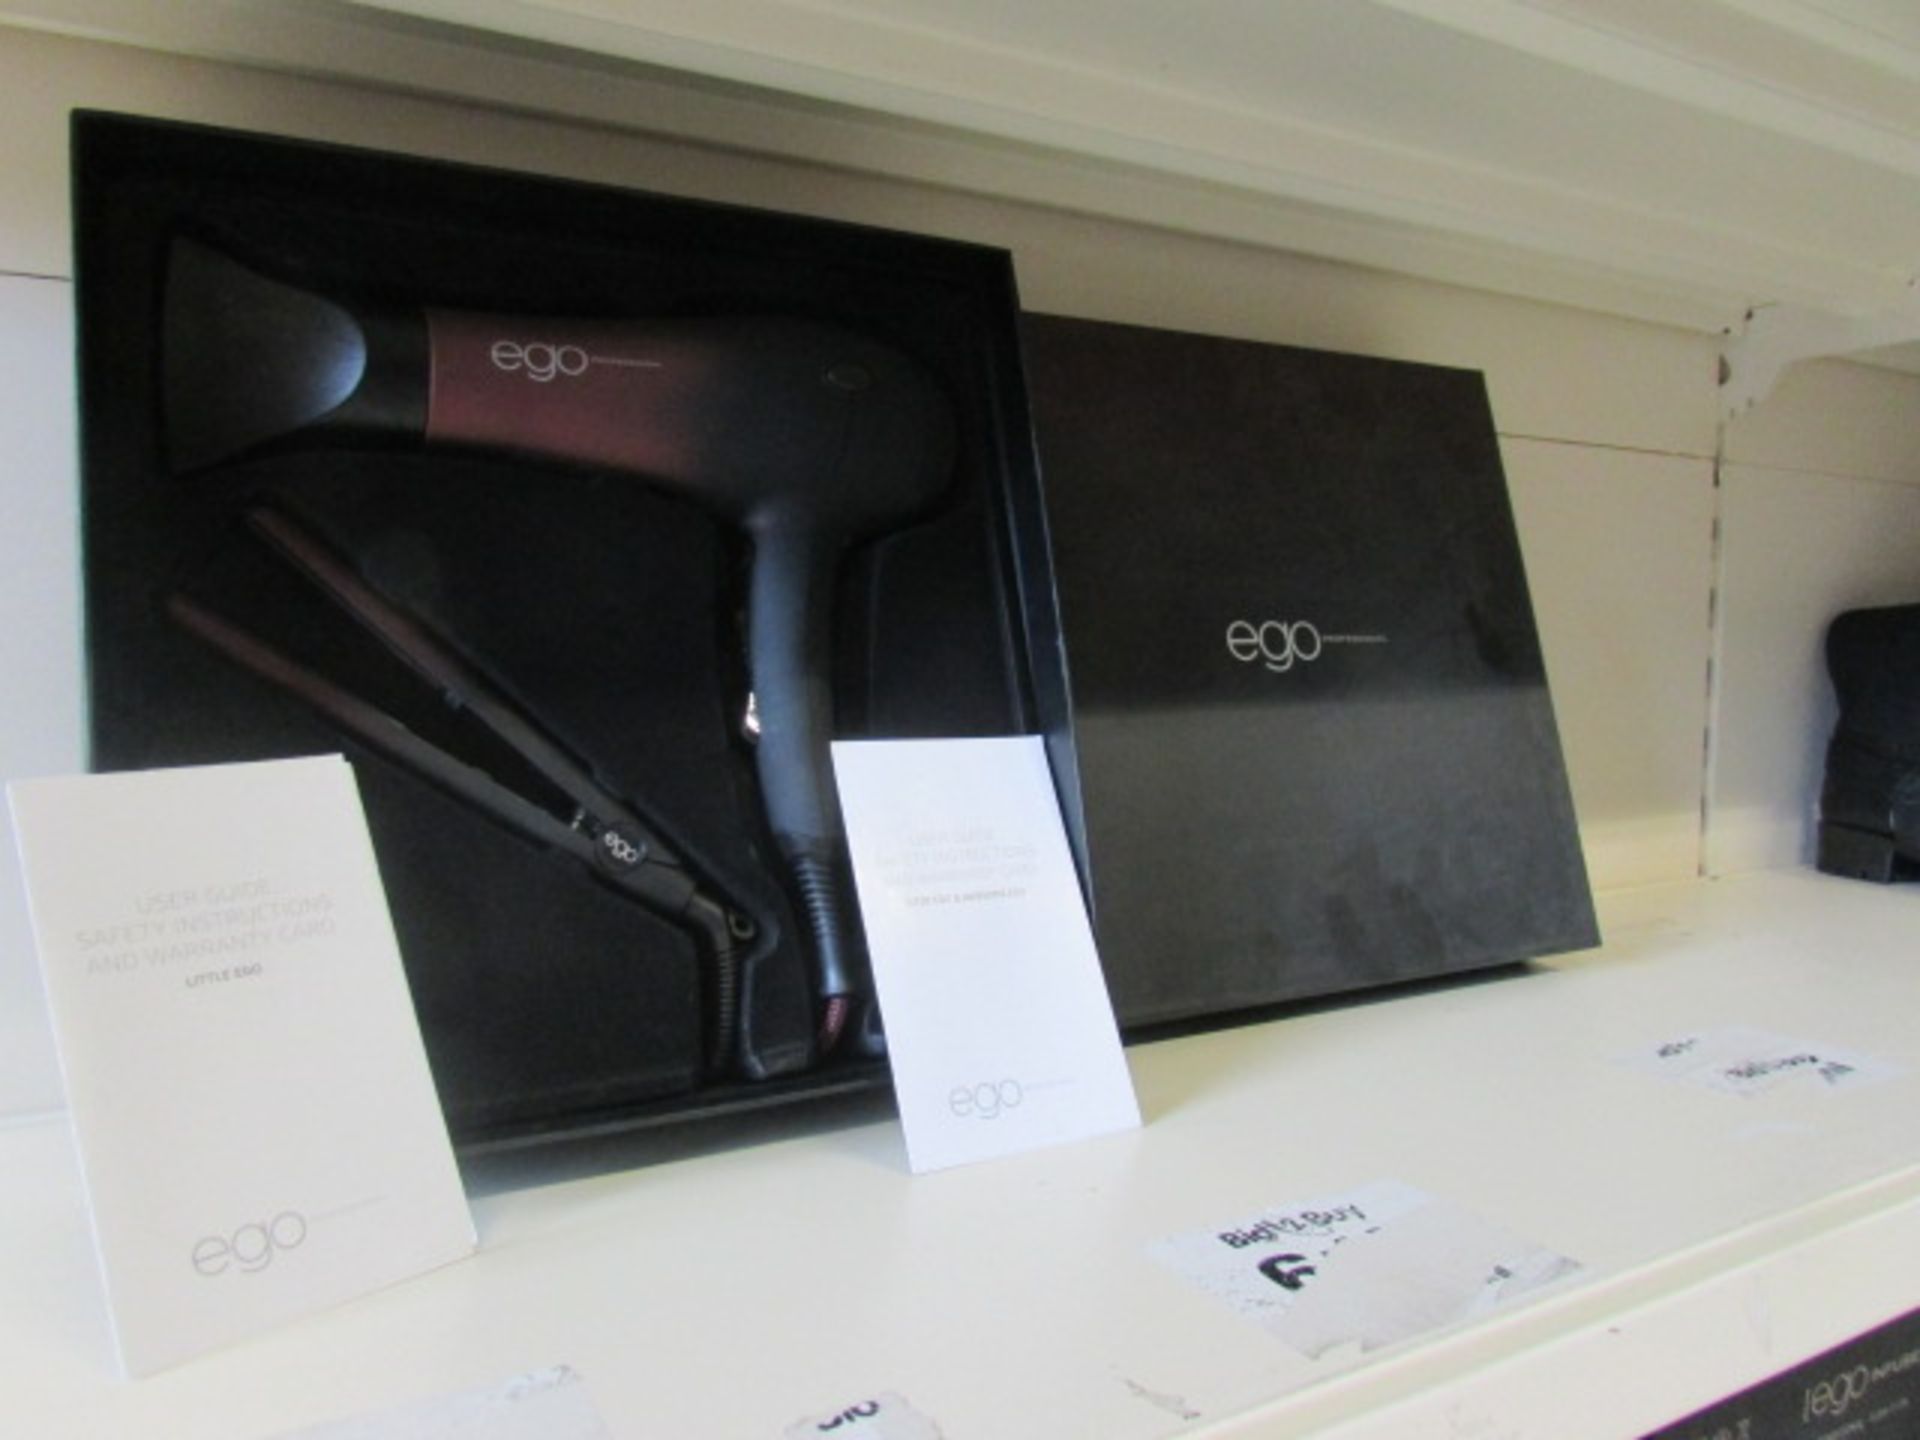 5 x Ego Professional Full On And Fabulous Ego Set (Alter Ego Hairdryer And Little Iron) [Grade A] - Image 2 of 3